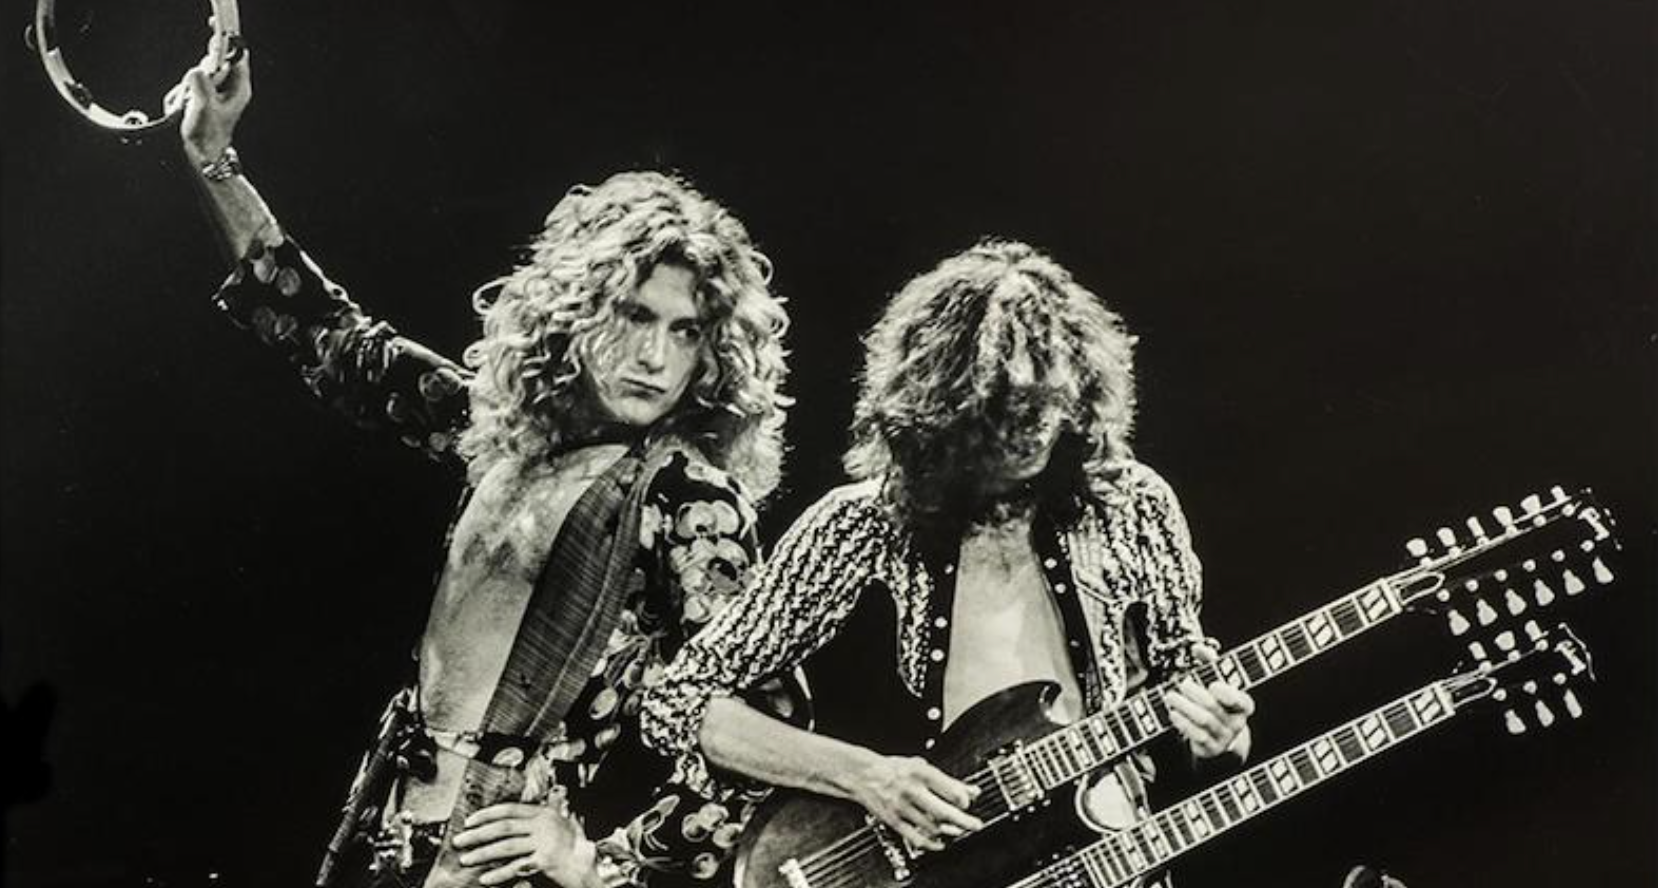 Robert Plant and Jimmy Page